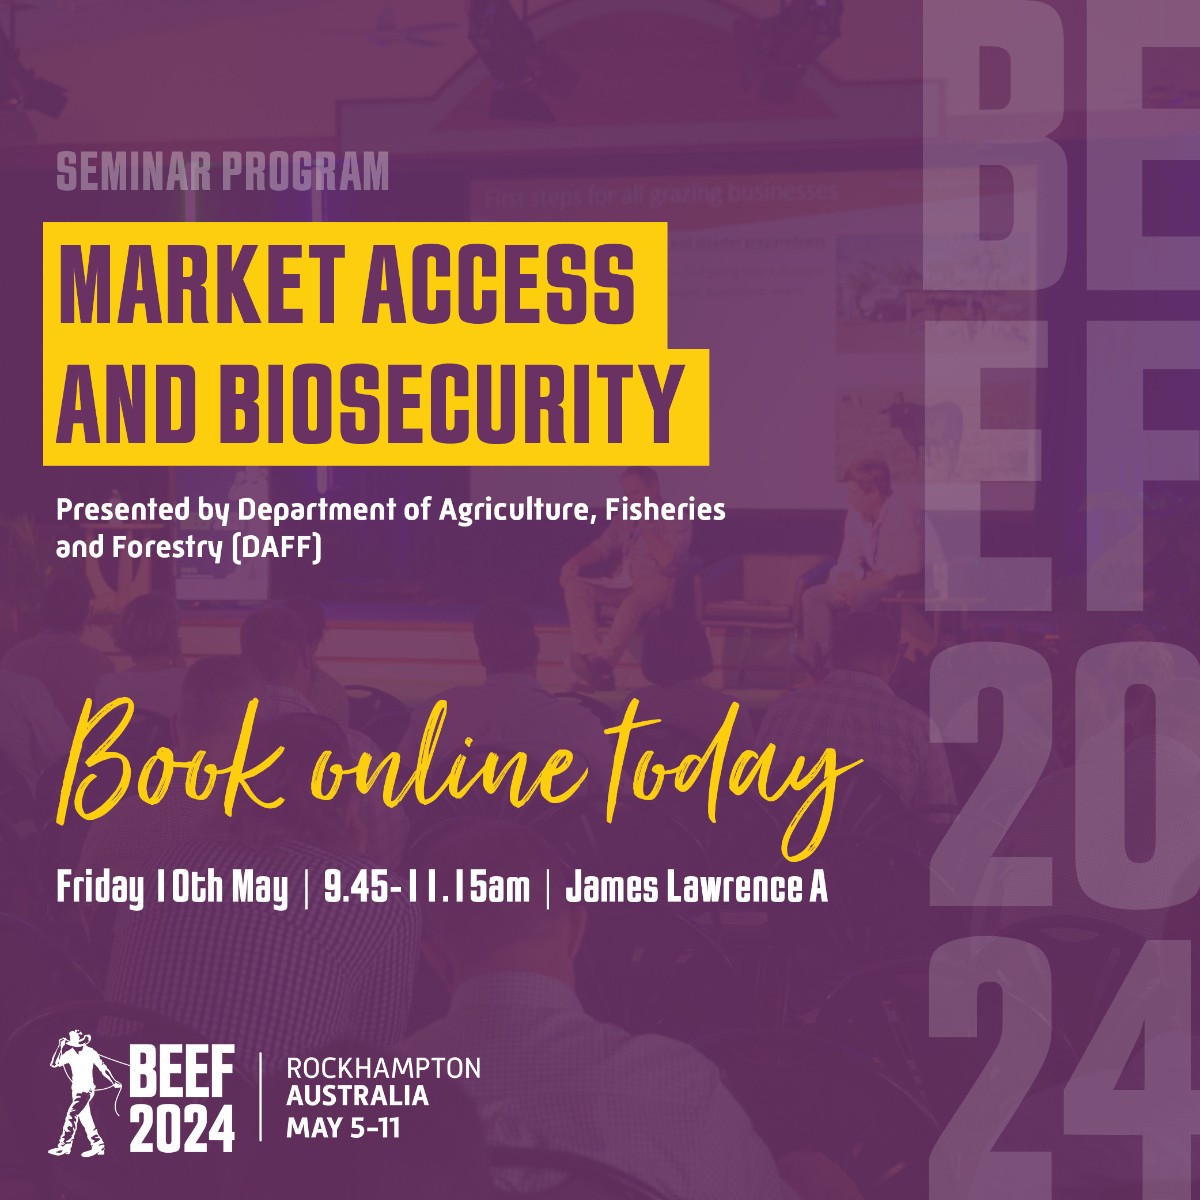 Hear about the national priorities for agriculture, fisheries and forestry, drought resilience, sustainability, trade regulations, and more at our @BeefAustralia 2024 seminars! For more information and to book, visit: brnw.ch/21wIXKT #beef2024 #beefaustralia